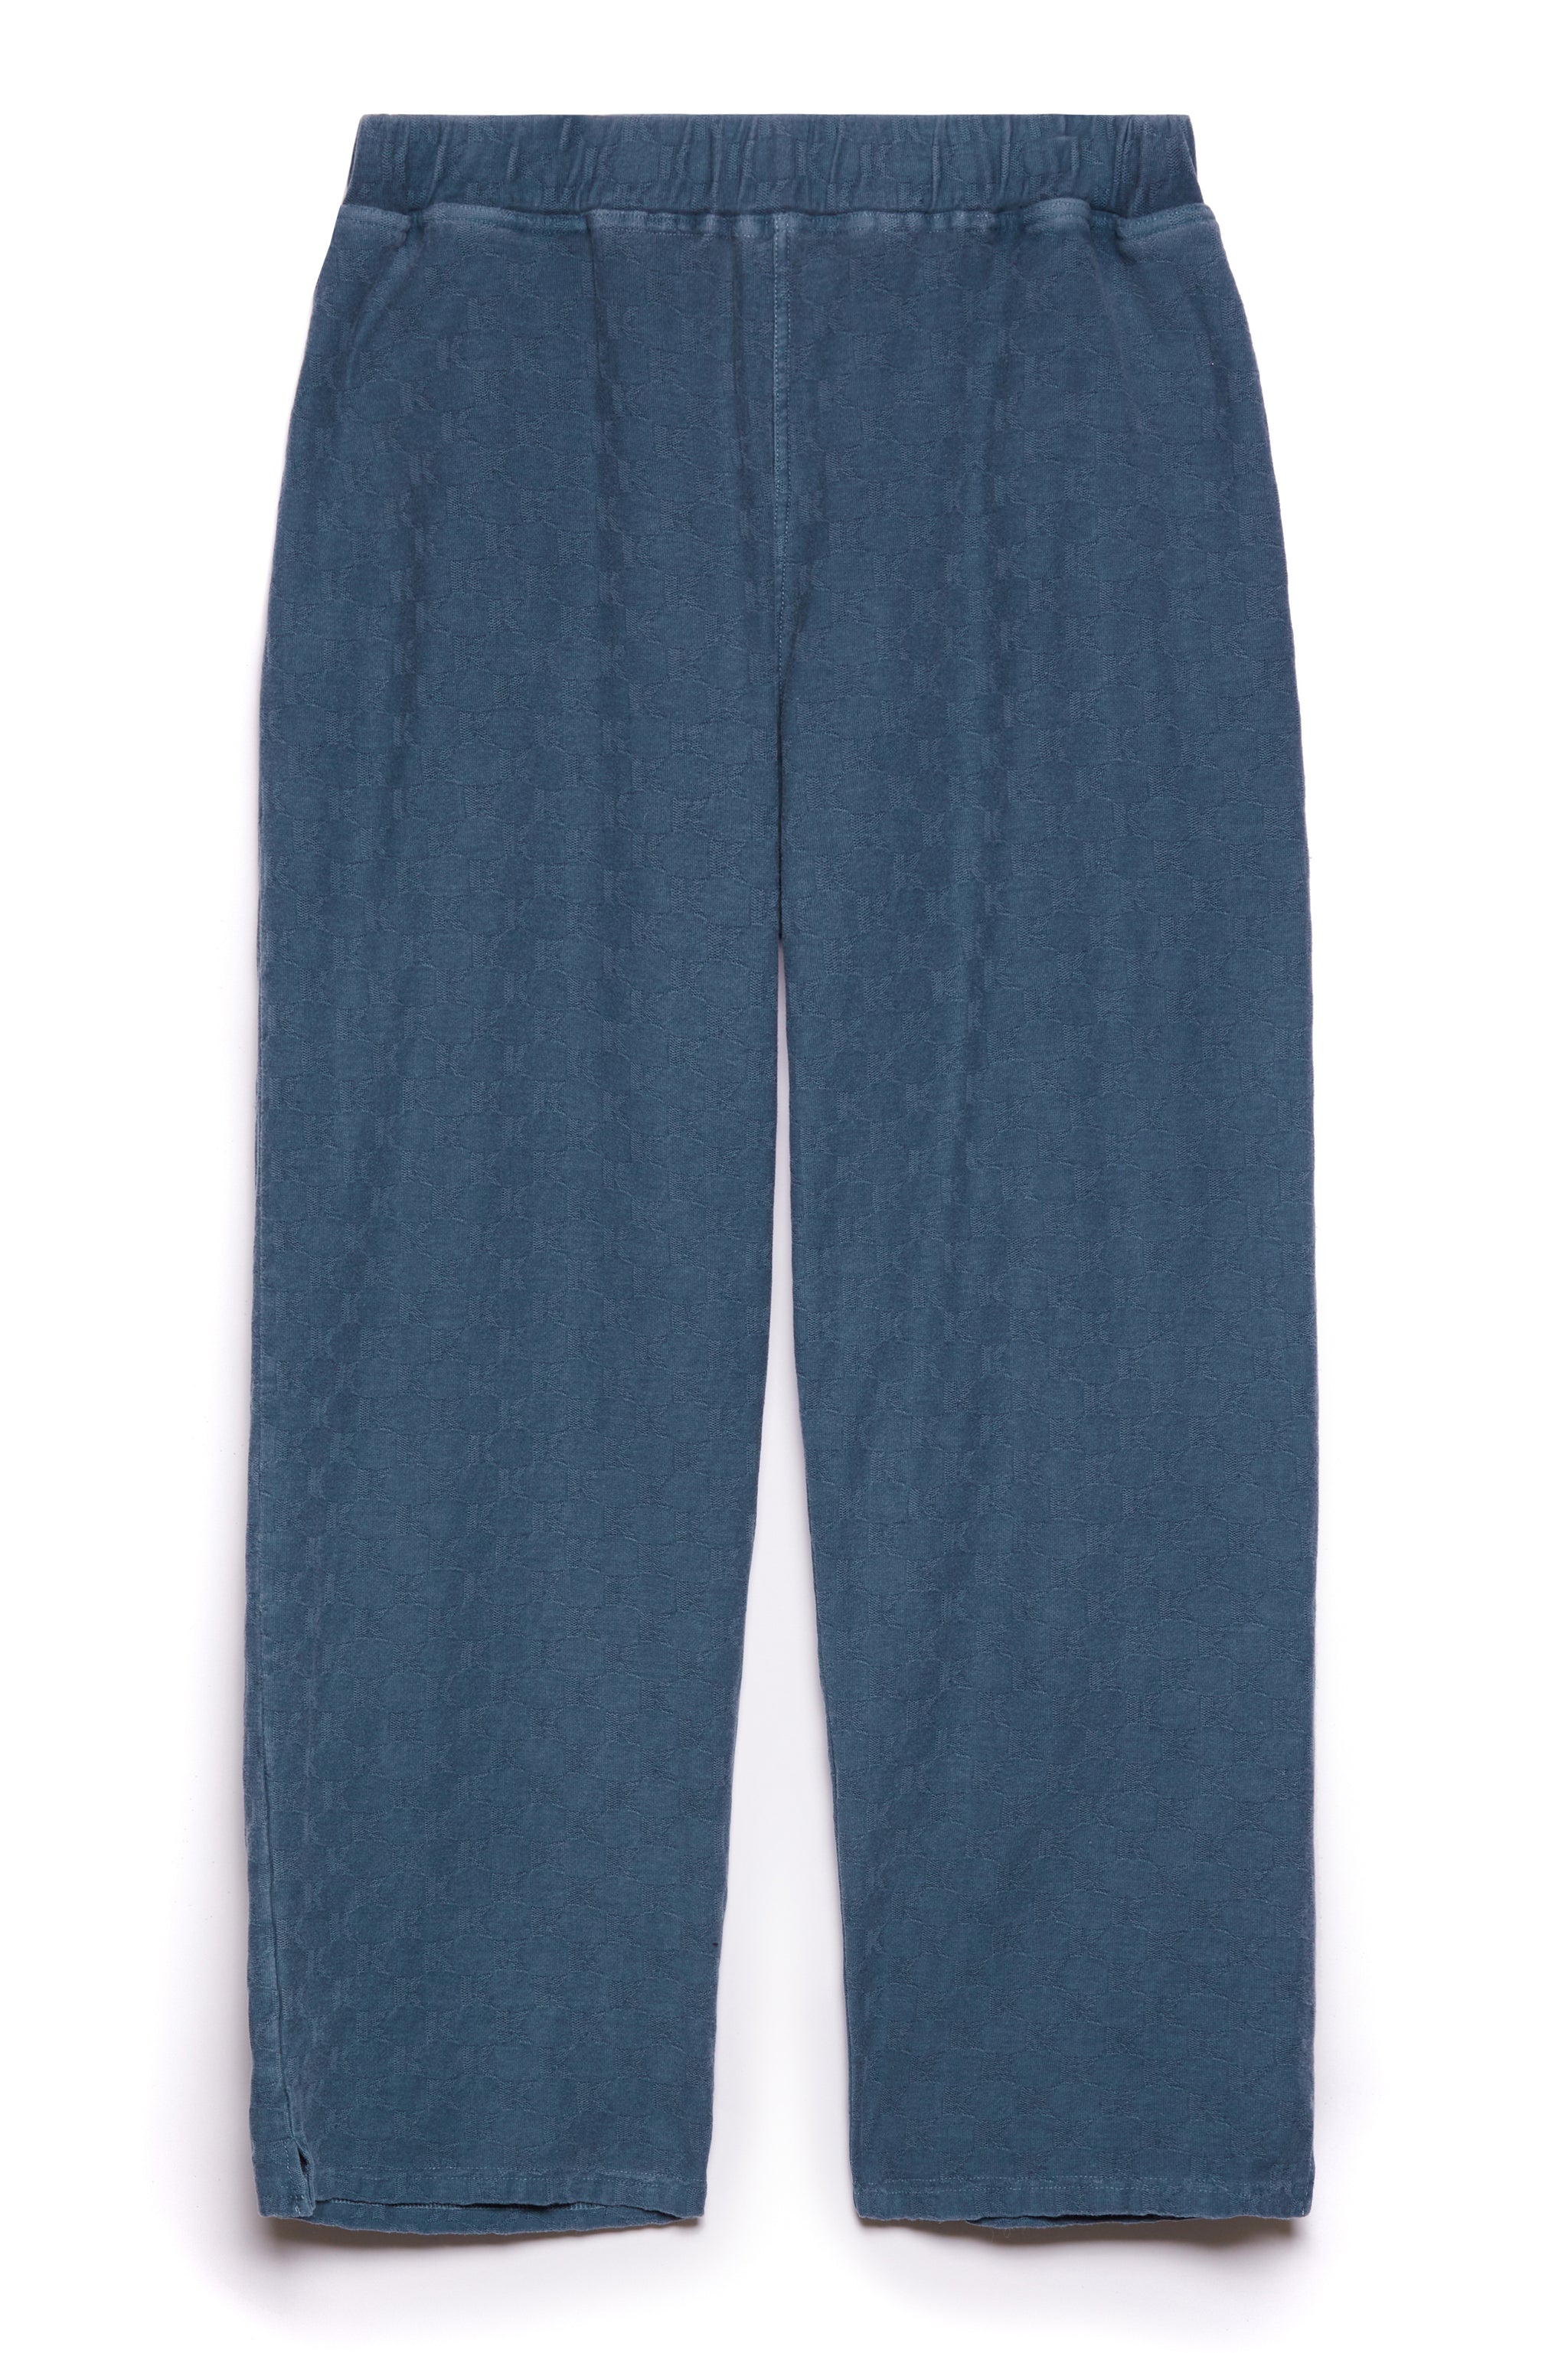 KOTTONS Stamped Wide-Leg Joggers in Denim Blue